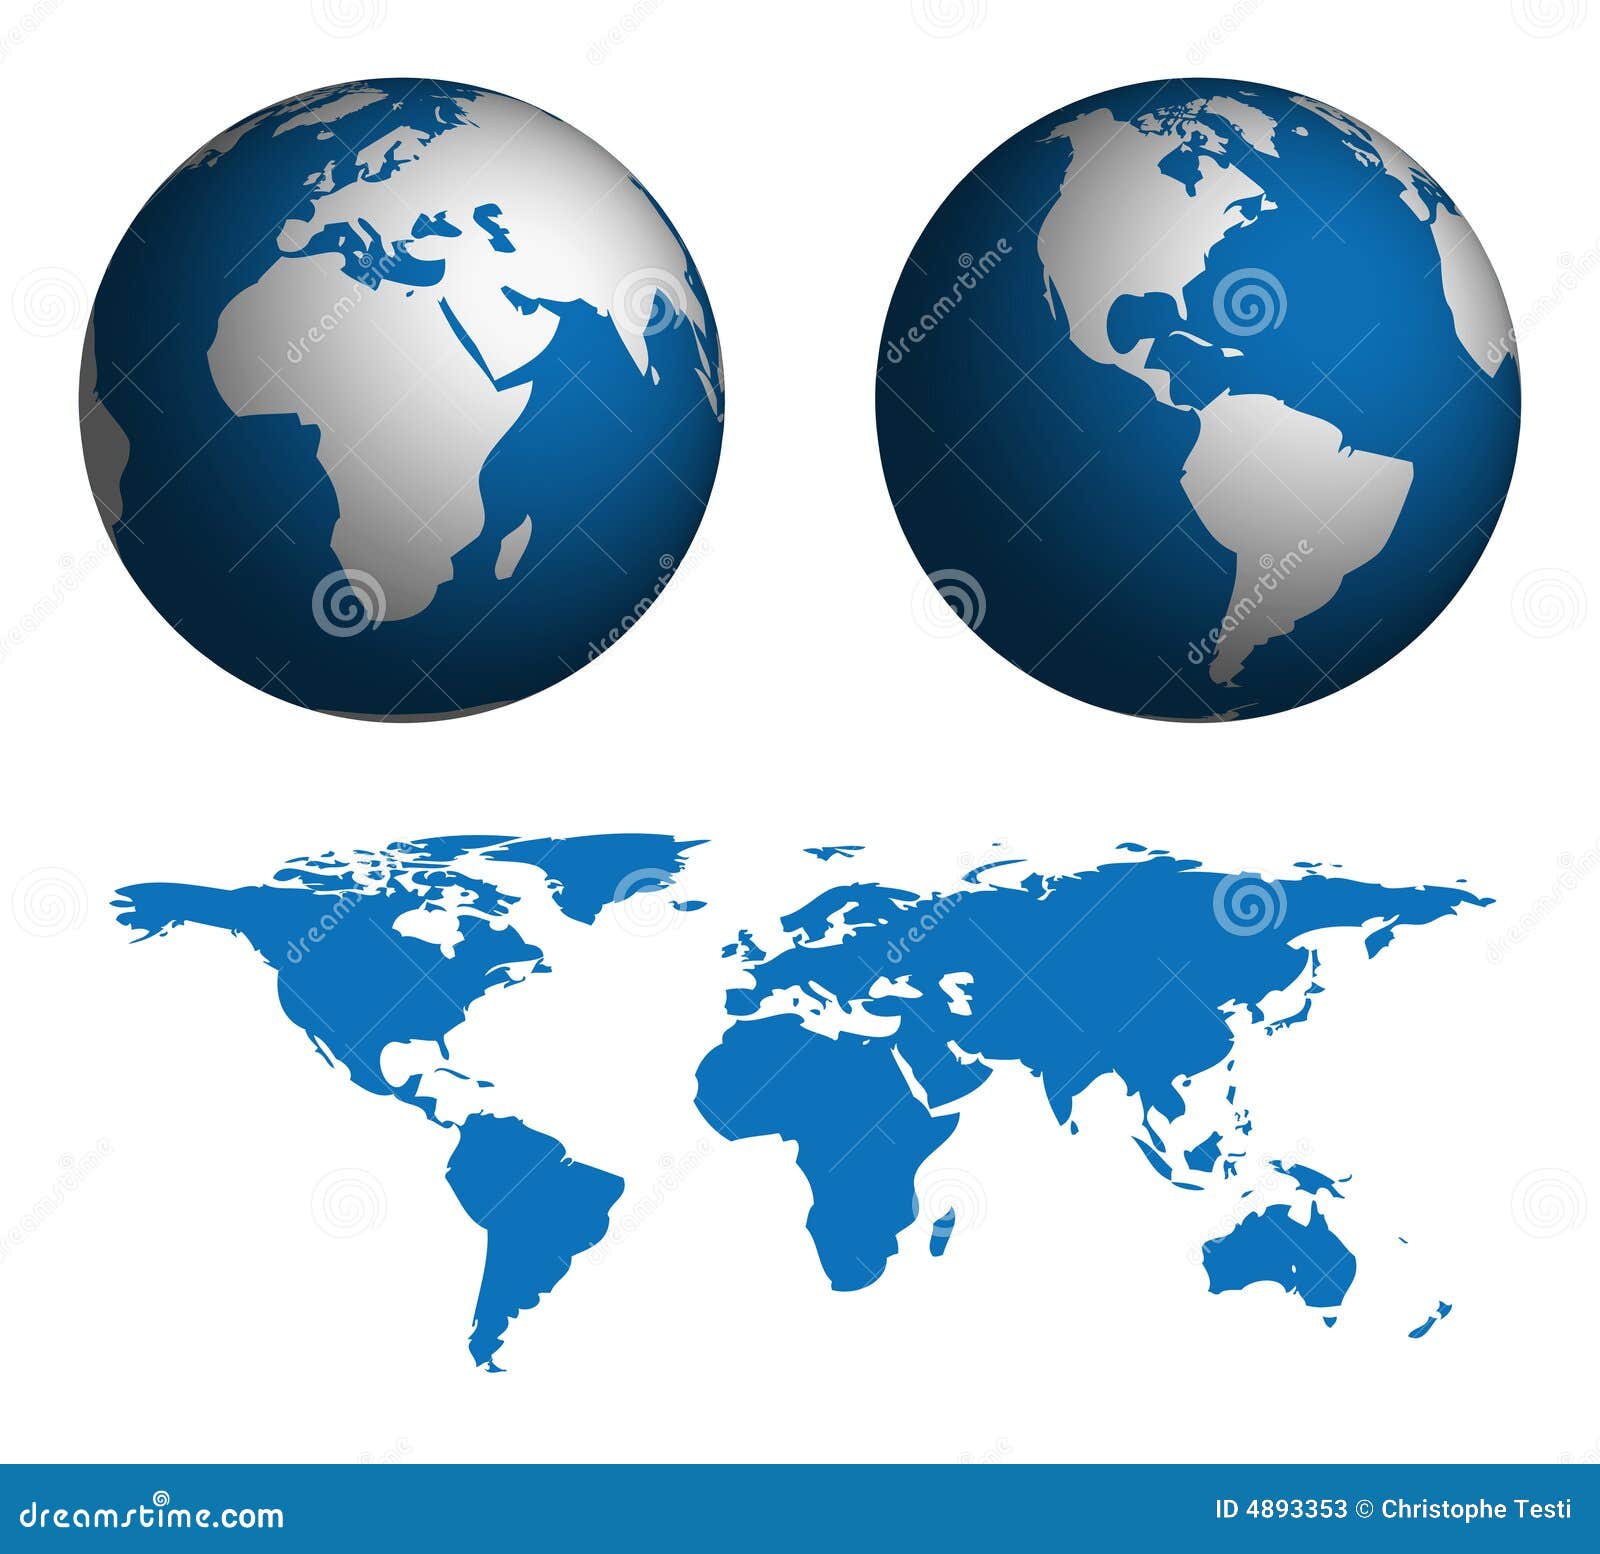 Globe And Map Of The World Stock Photos - Image: 4893353